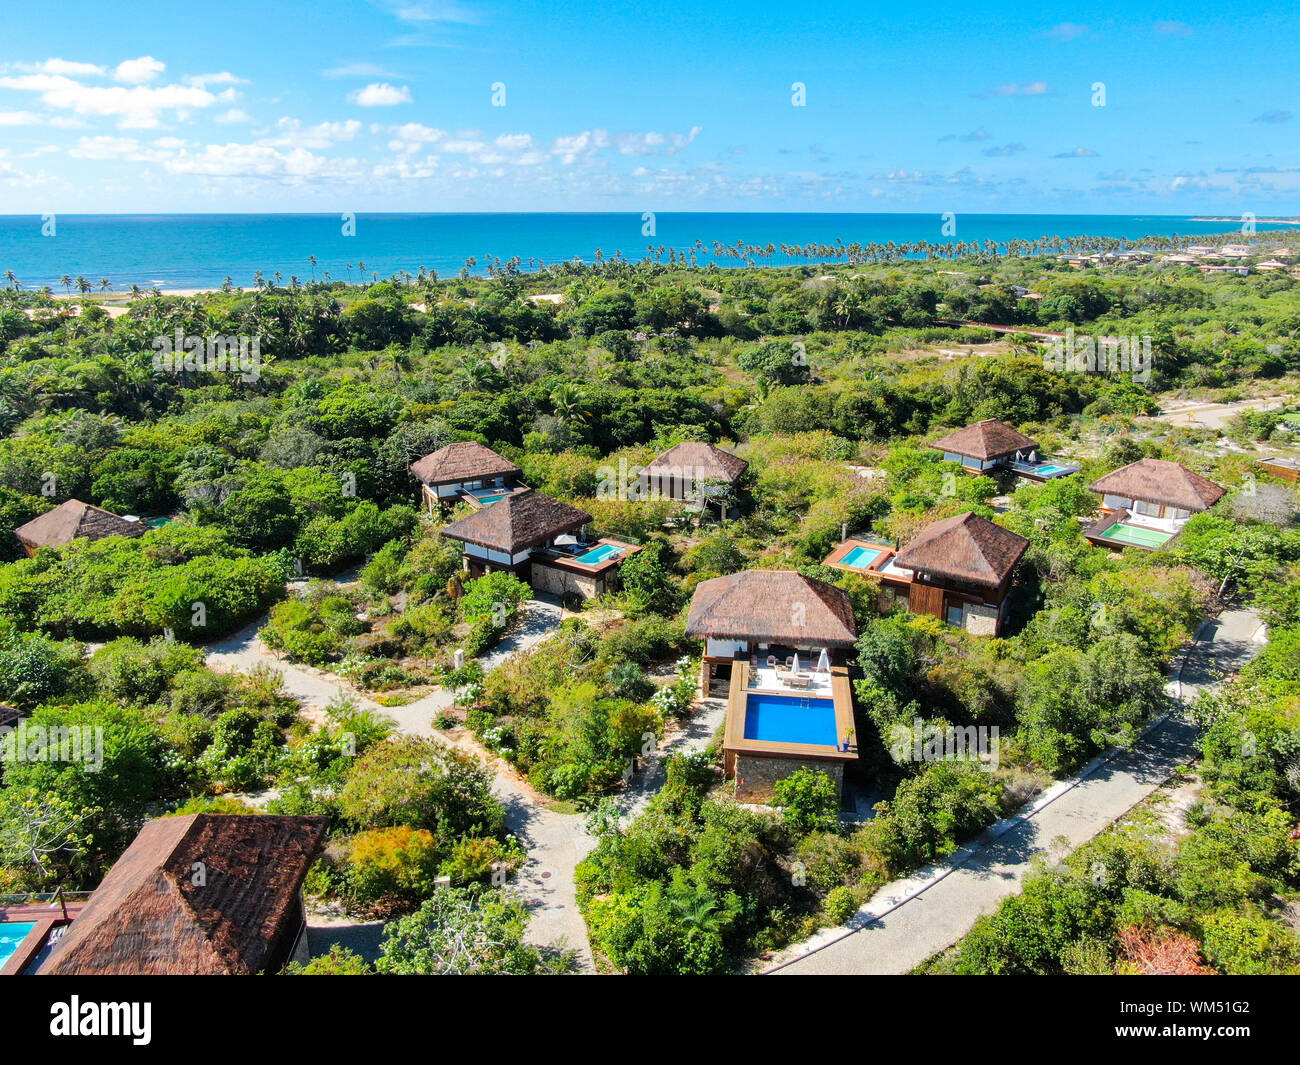 Aerial view of luxury villa with swimming pool in tropical forest. Private tropical villa with swimming pool among tropical garden with palm trees Stock Photo